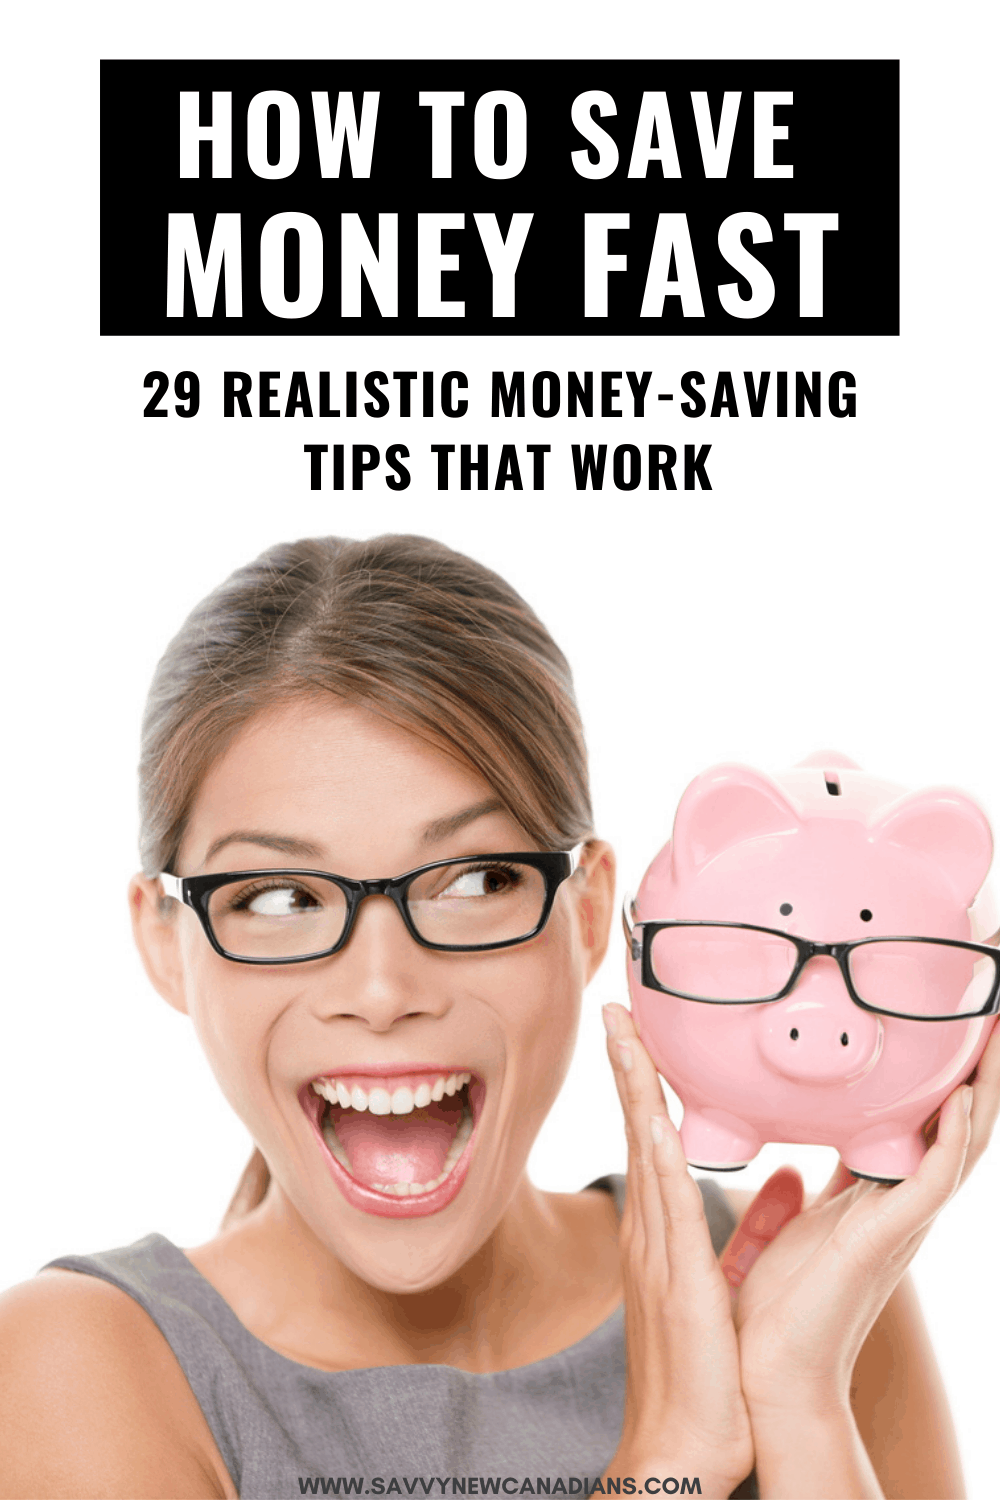 How To Save Money Fast in Canada (29 Creative Ways To Save $$$)